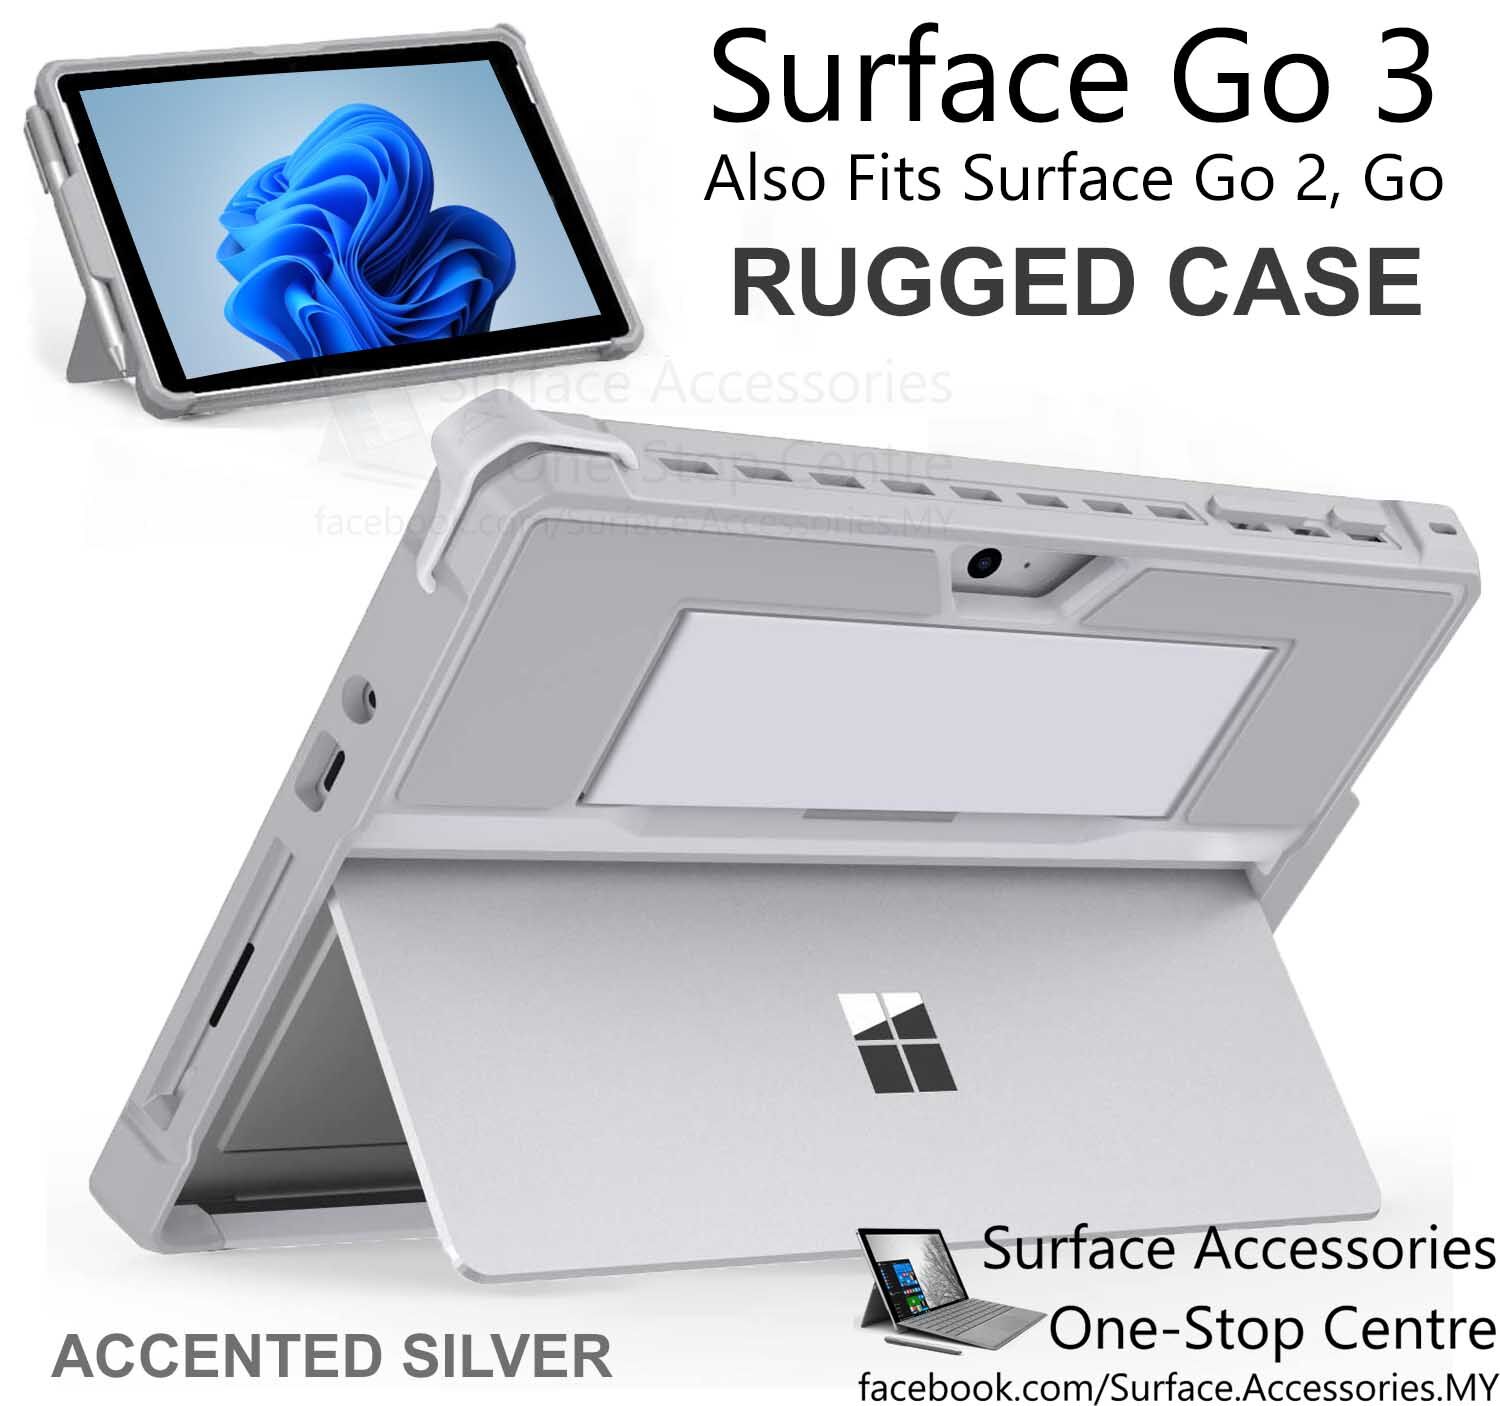 [MALAYSIA]Microsoft Surface Go 3 Rugged Casing with Pen Holder Surface Go 2 Rugged Case Stand Flip Case with Pen Holder Case Surface Go 3 Protective Case Surface Go 2 Case Rugged Case Surface Go Protective Case Surface Go Rugged Case with Pen Holder